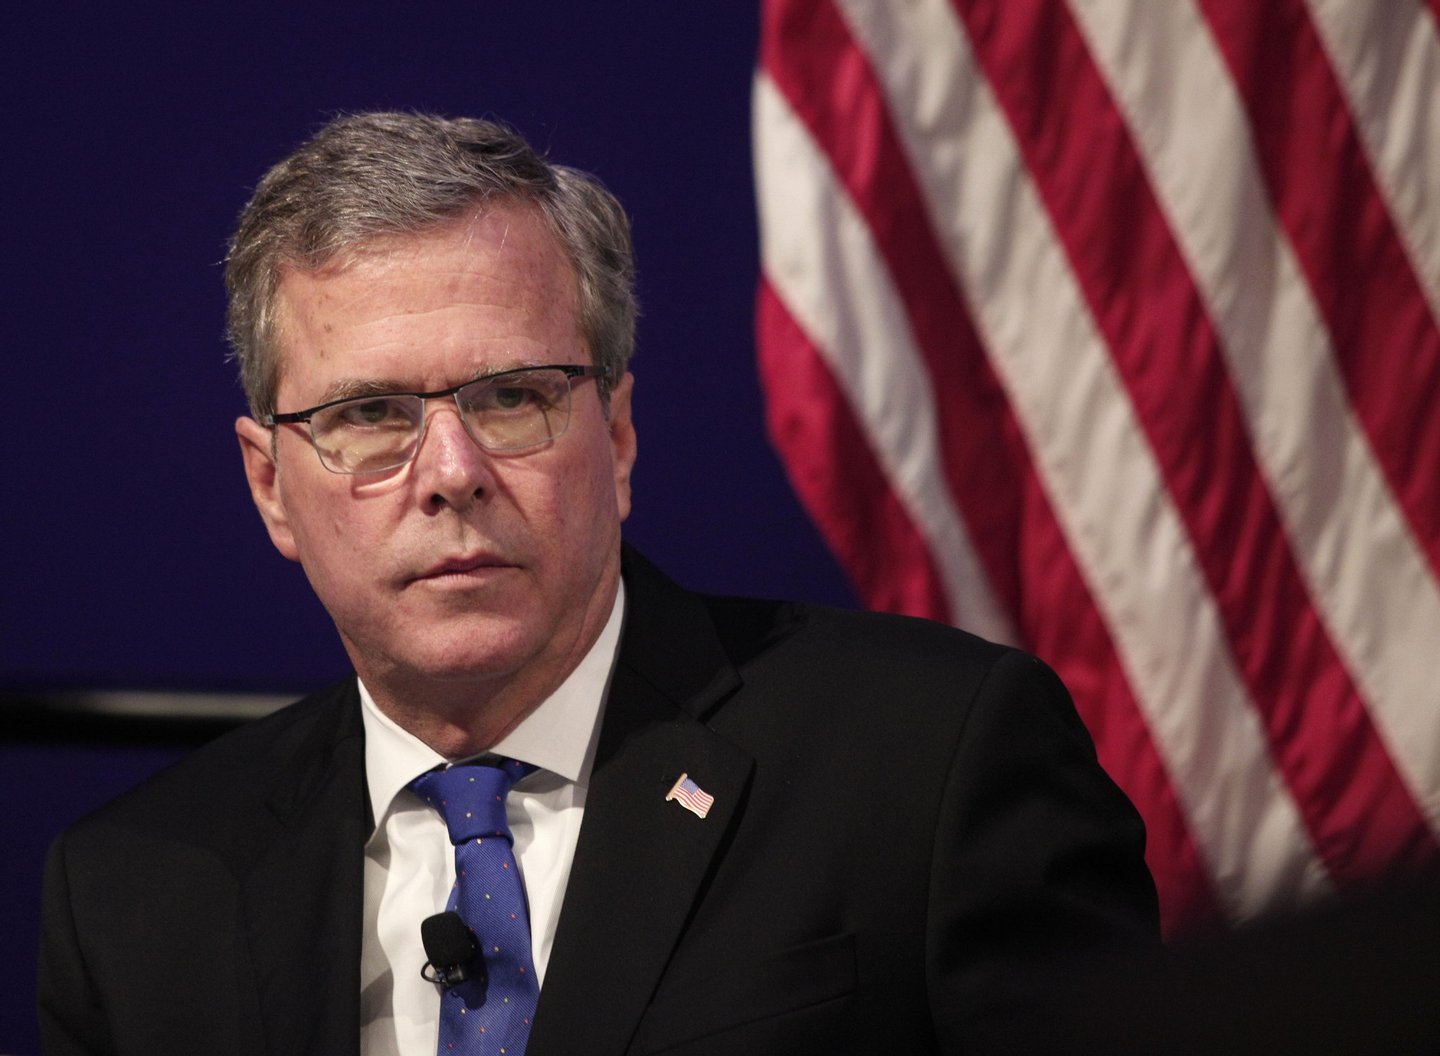 DETROIT, MI - FEBRUARY 4: Former Florida Governor Jeb Bush waits to speak at the Detroit Economic Club February 4, 2015 in Detroit, Michigan. Bush, the son of former republican President George H.W. Bush and the brother of former republican President George W. Bush, is considering becoming a republican candidate for the 2016 presidential election. (Photo by Bill Pugliano/Getty Images)